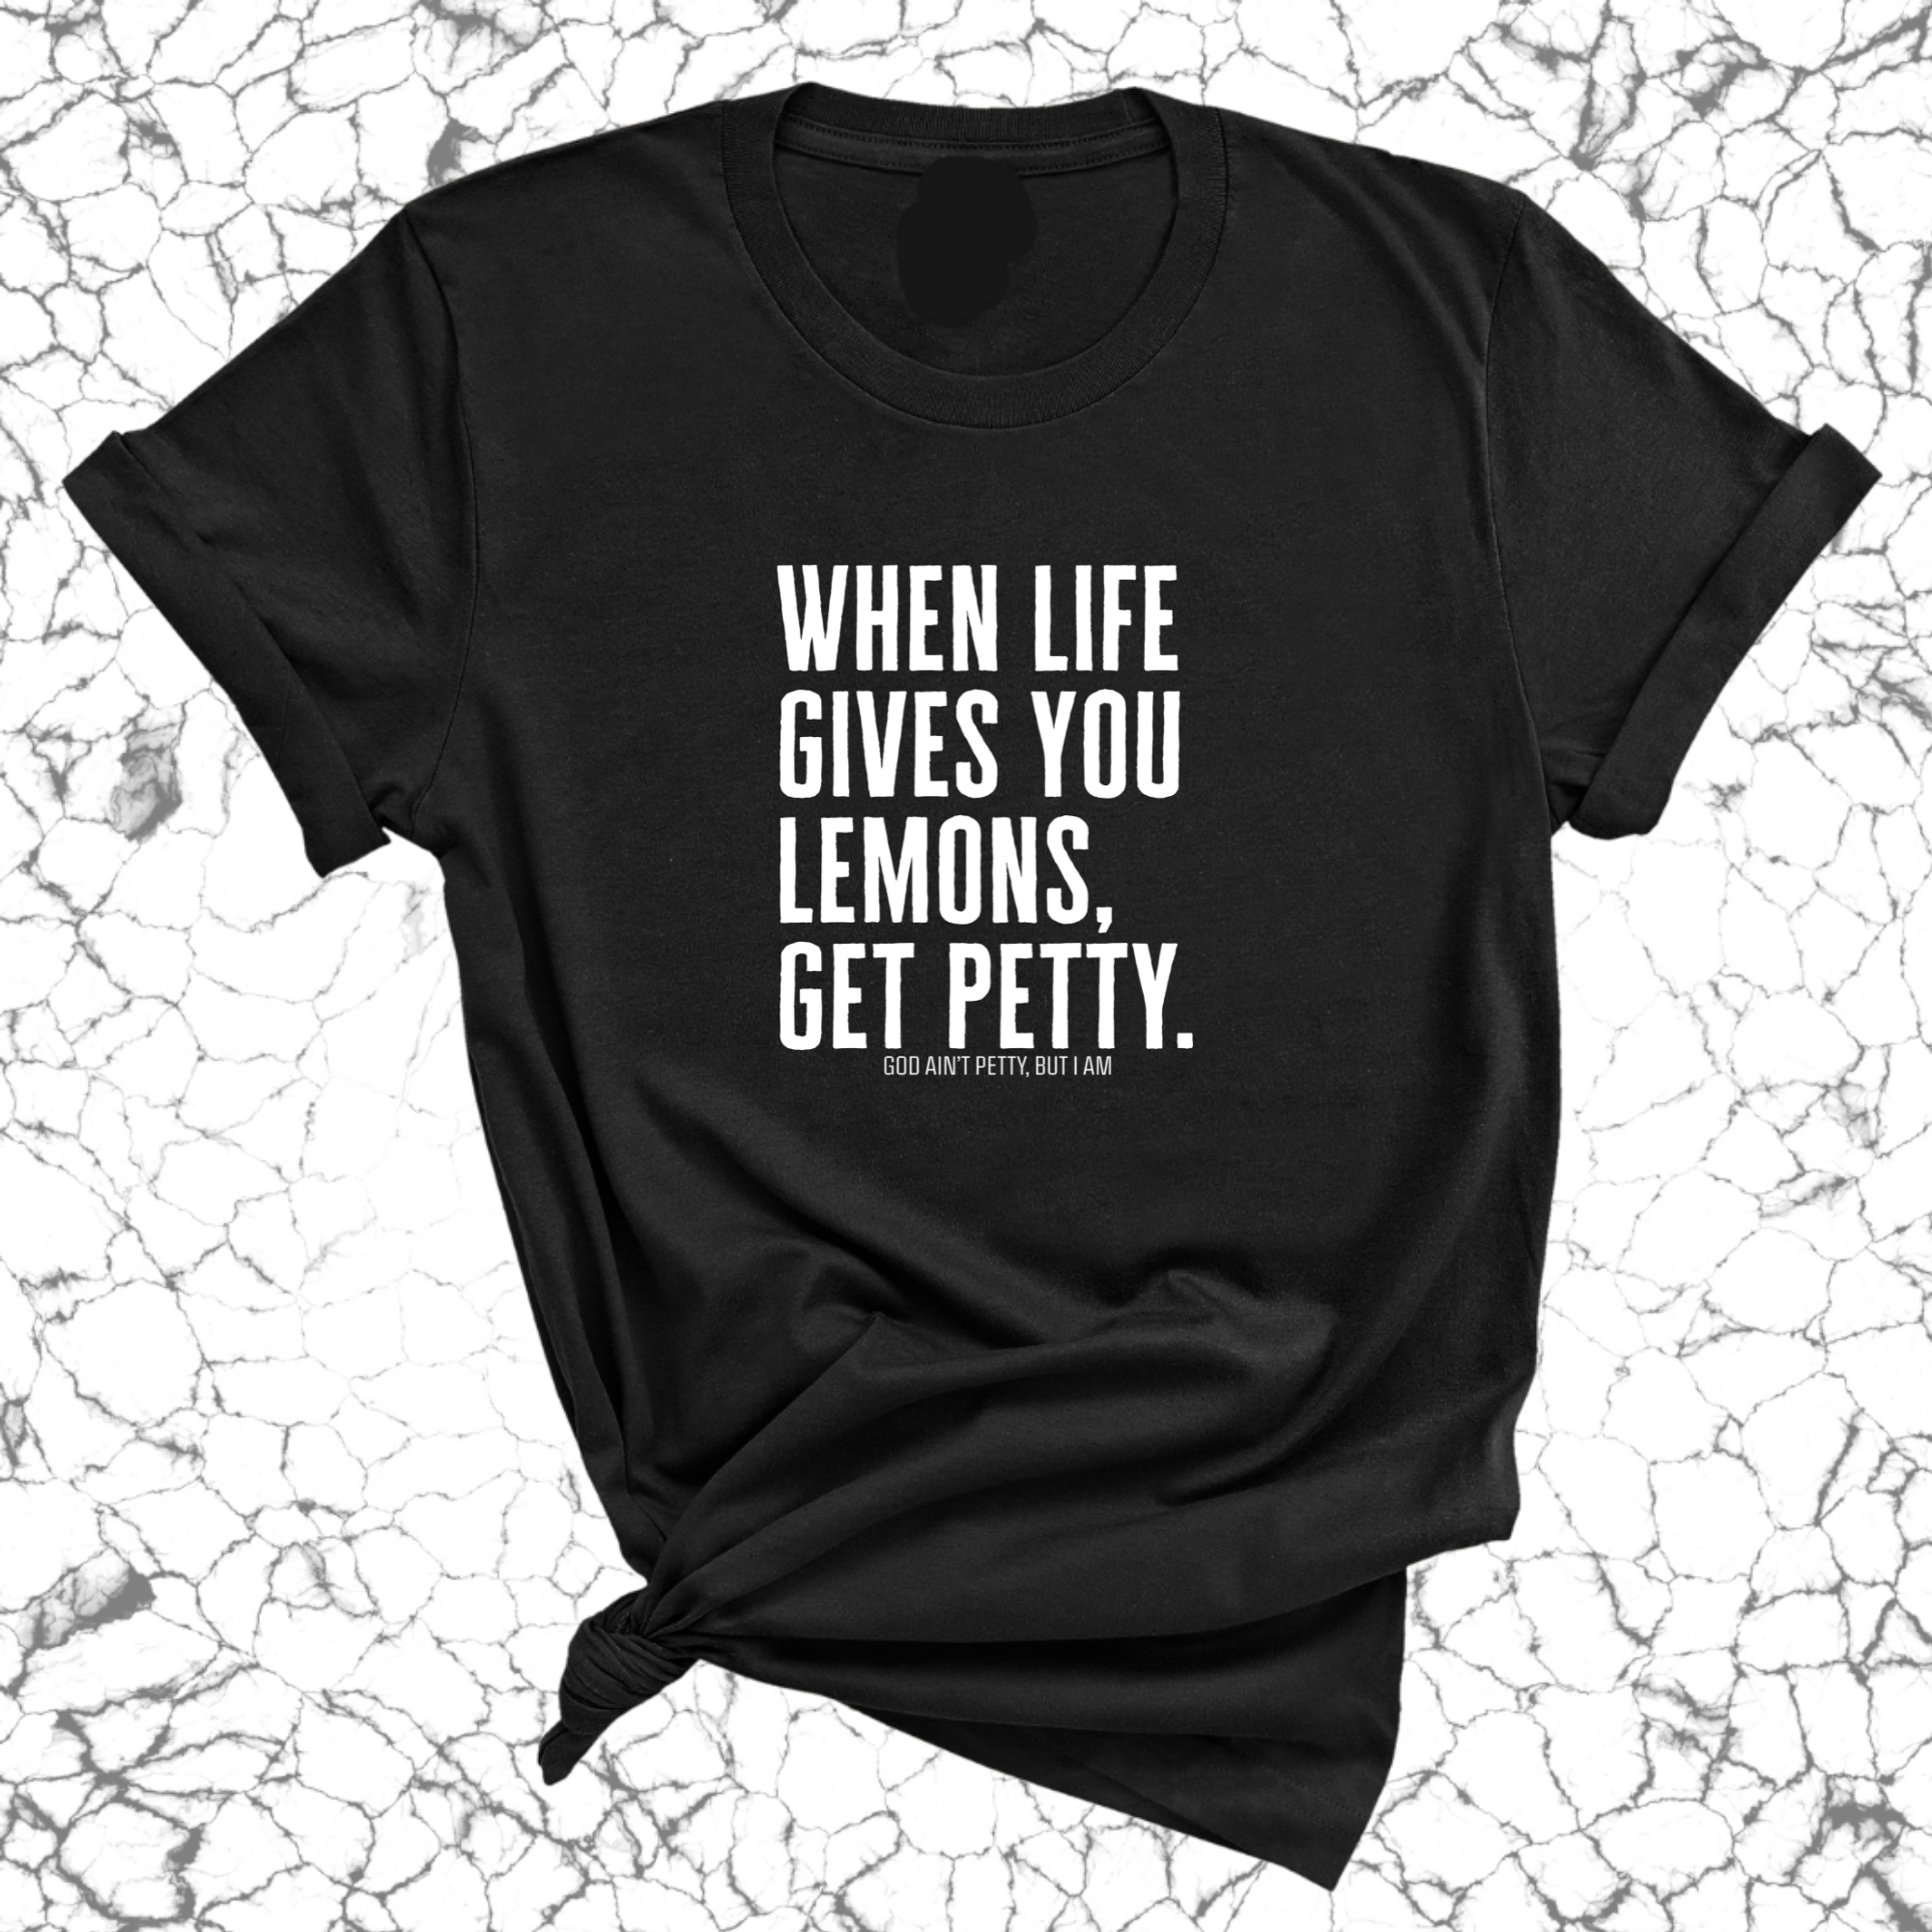 When life gives you lemons, get petty Unisex Tee-T-Shirt-The Original God Ain't Petty But I Am